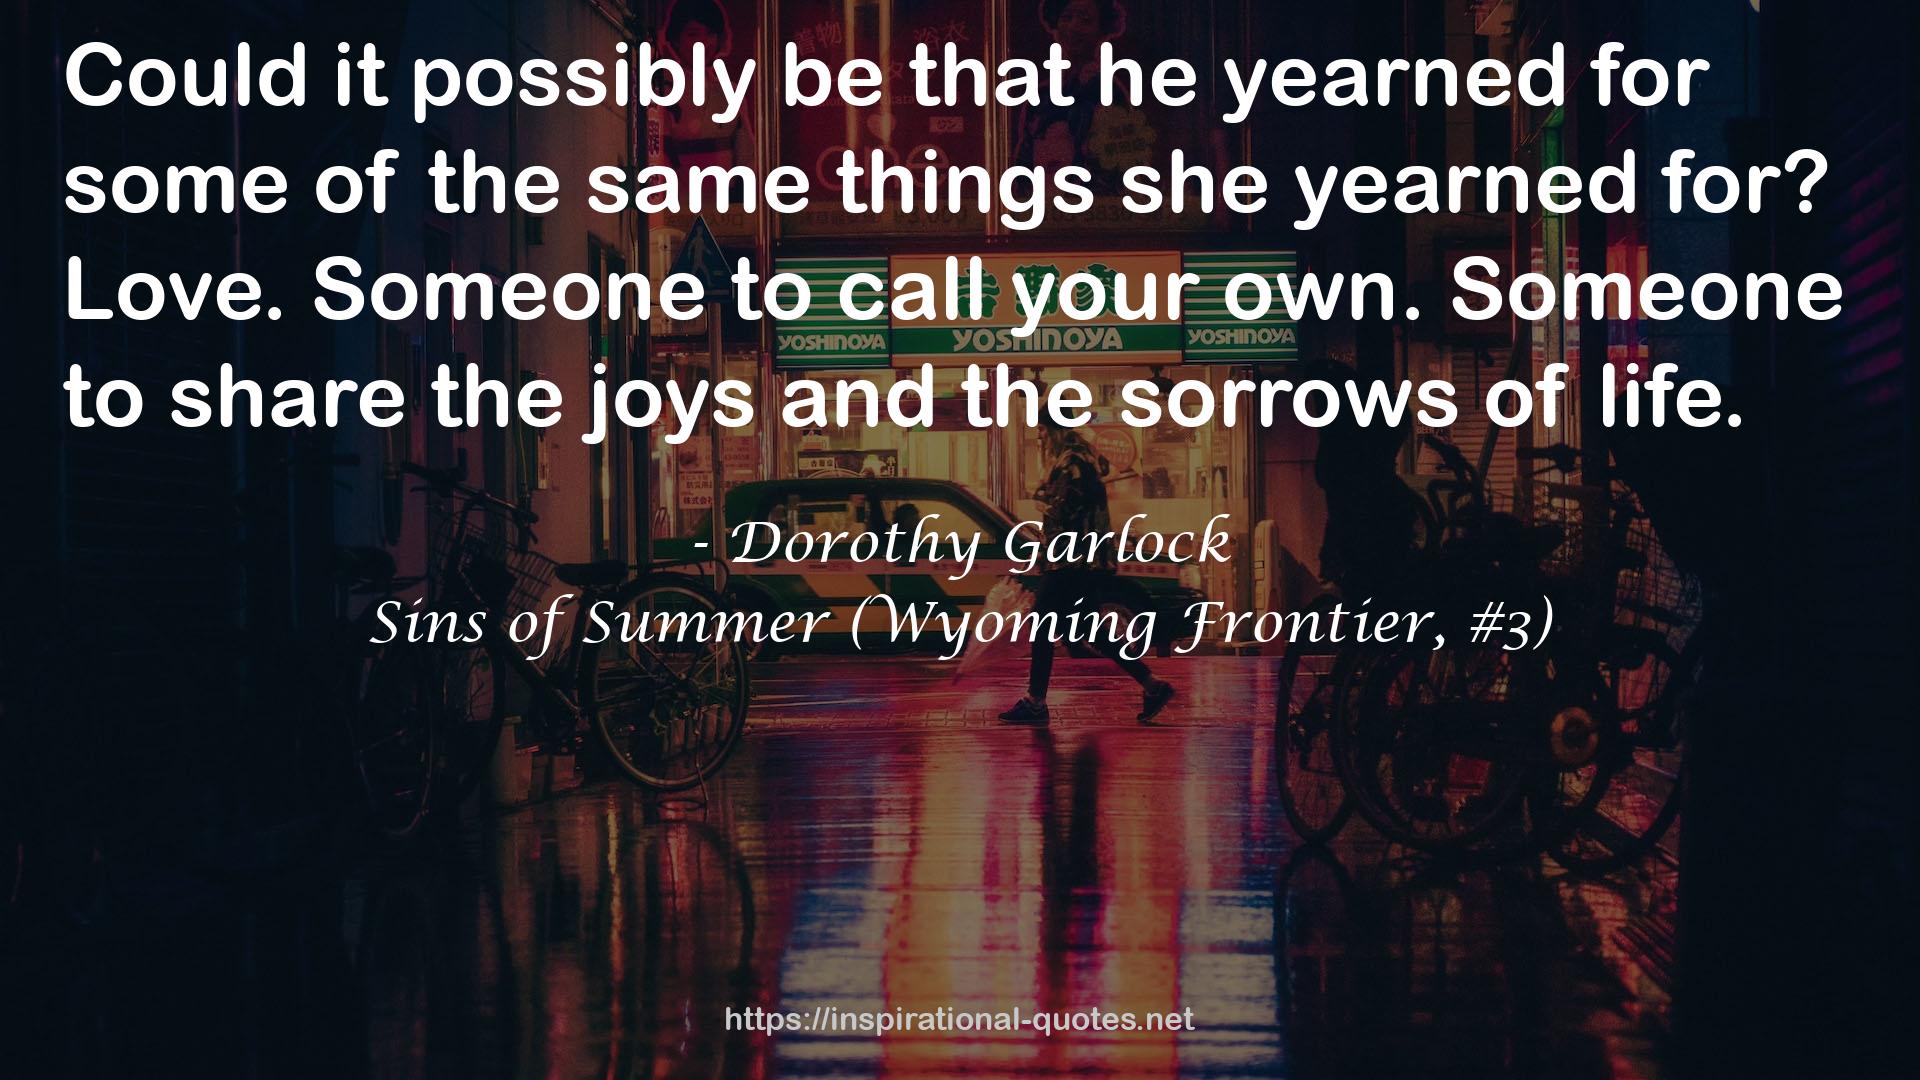 Sins of Summer (Wyoming Frontier, #3) QUOTES